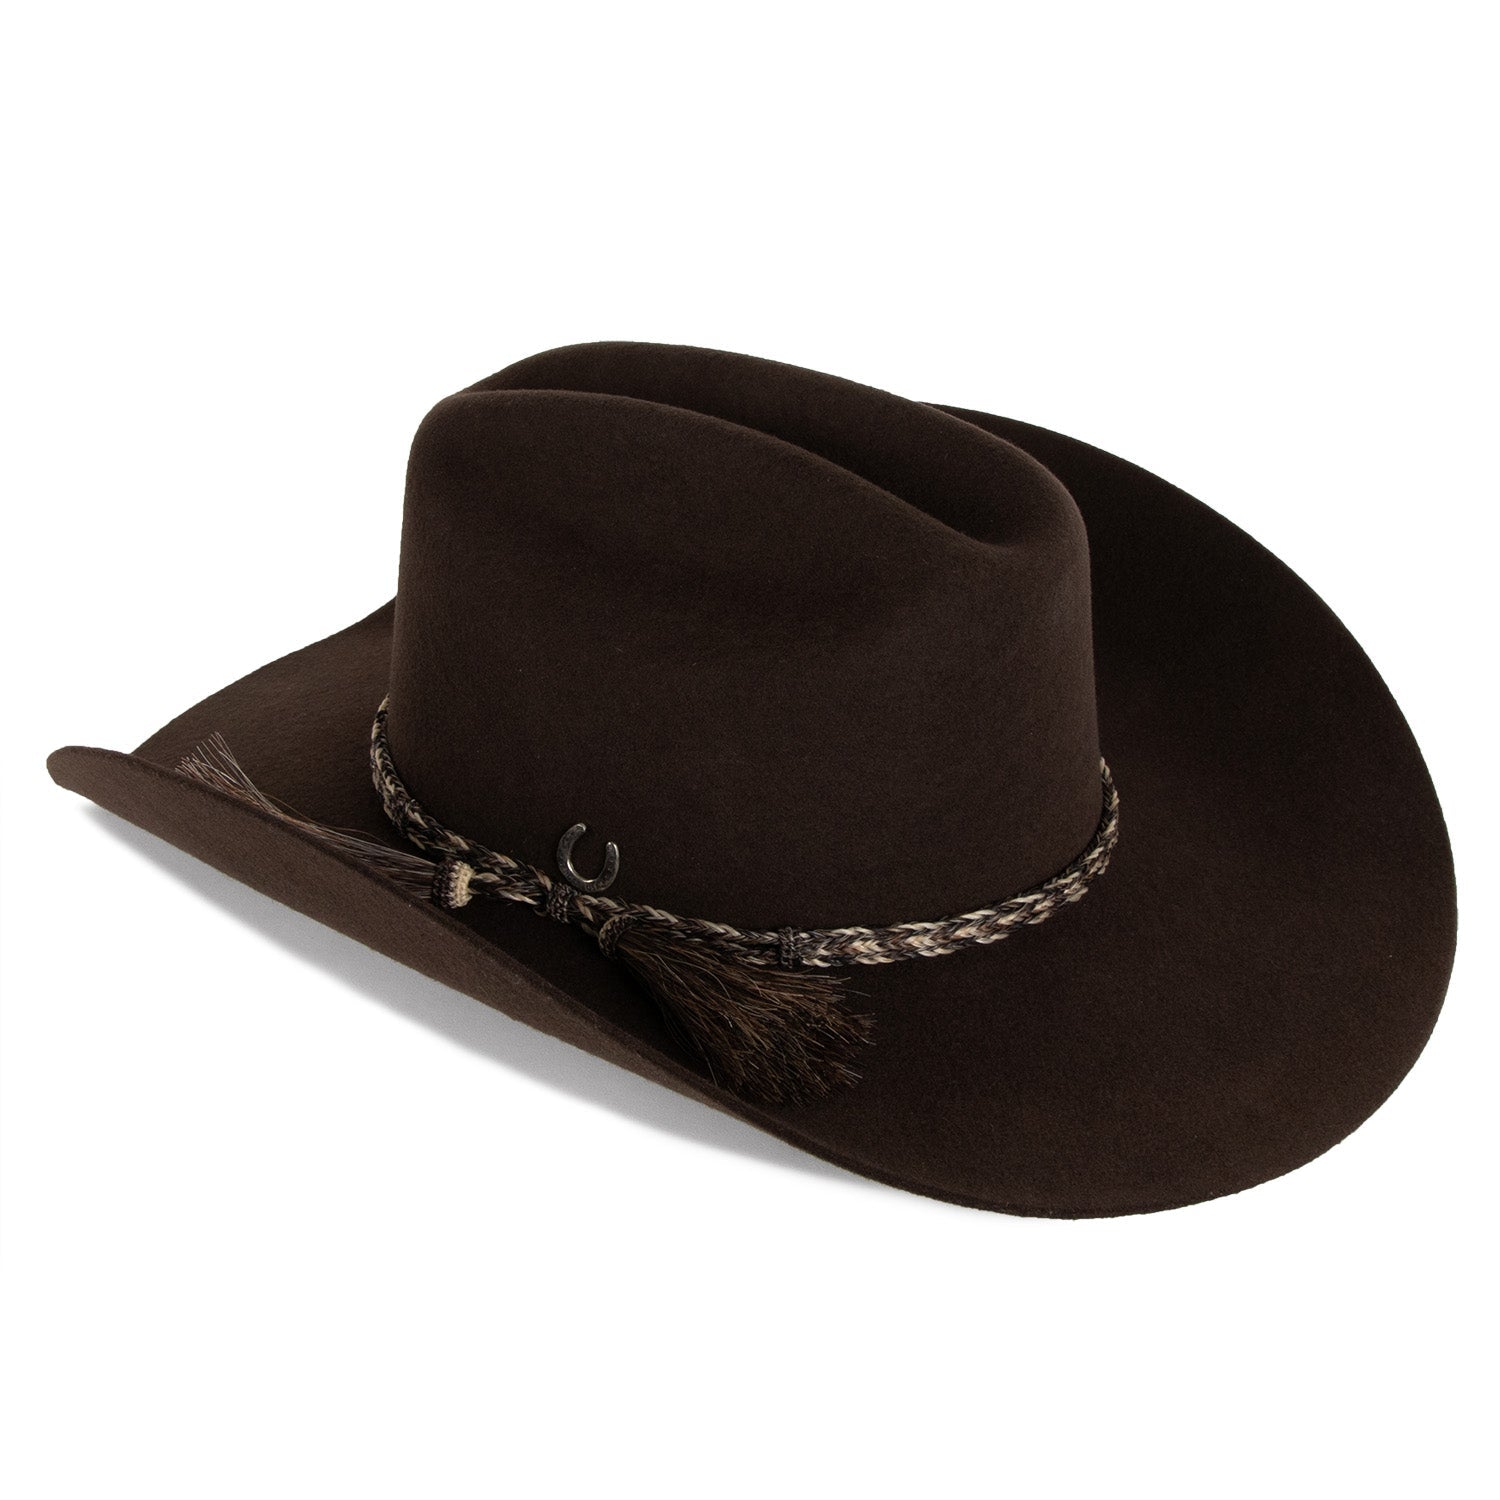 SEAGER X HUCKBERRY LONGHORN 4X HAT CHOCOLATE - 7 3/8